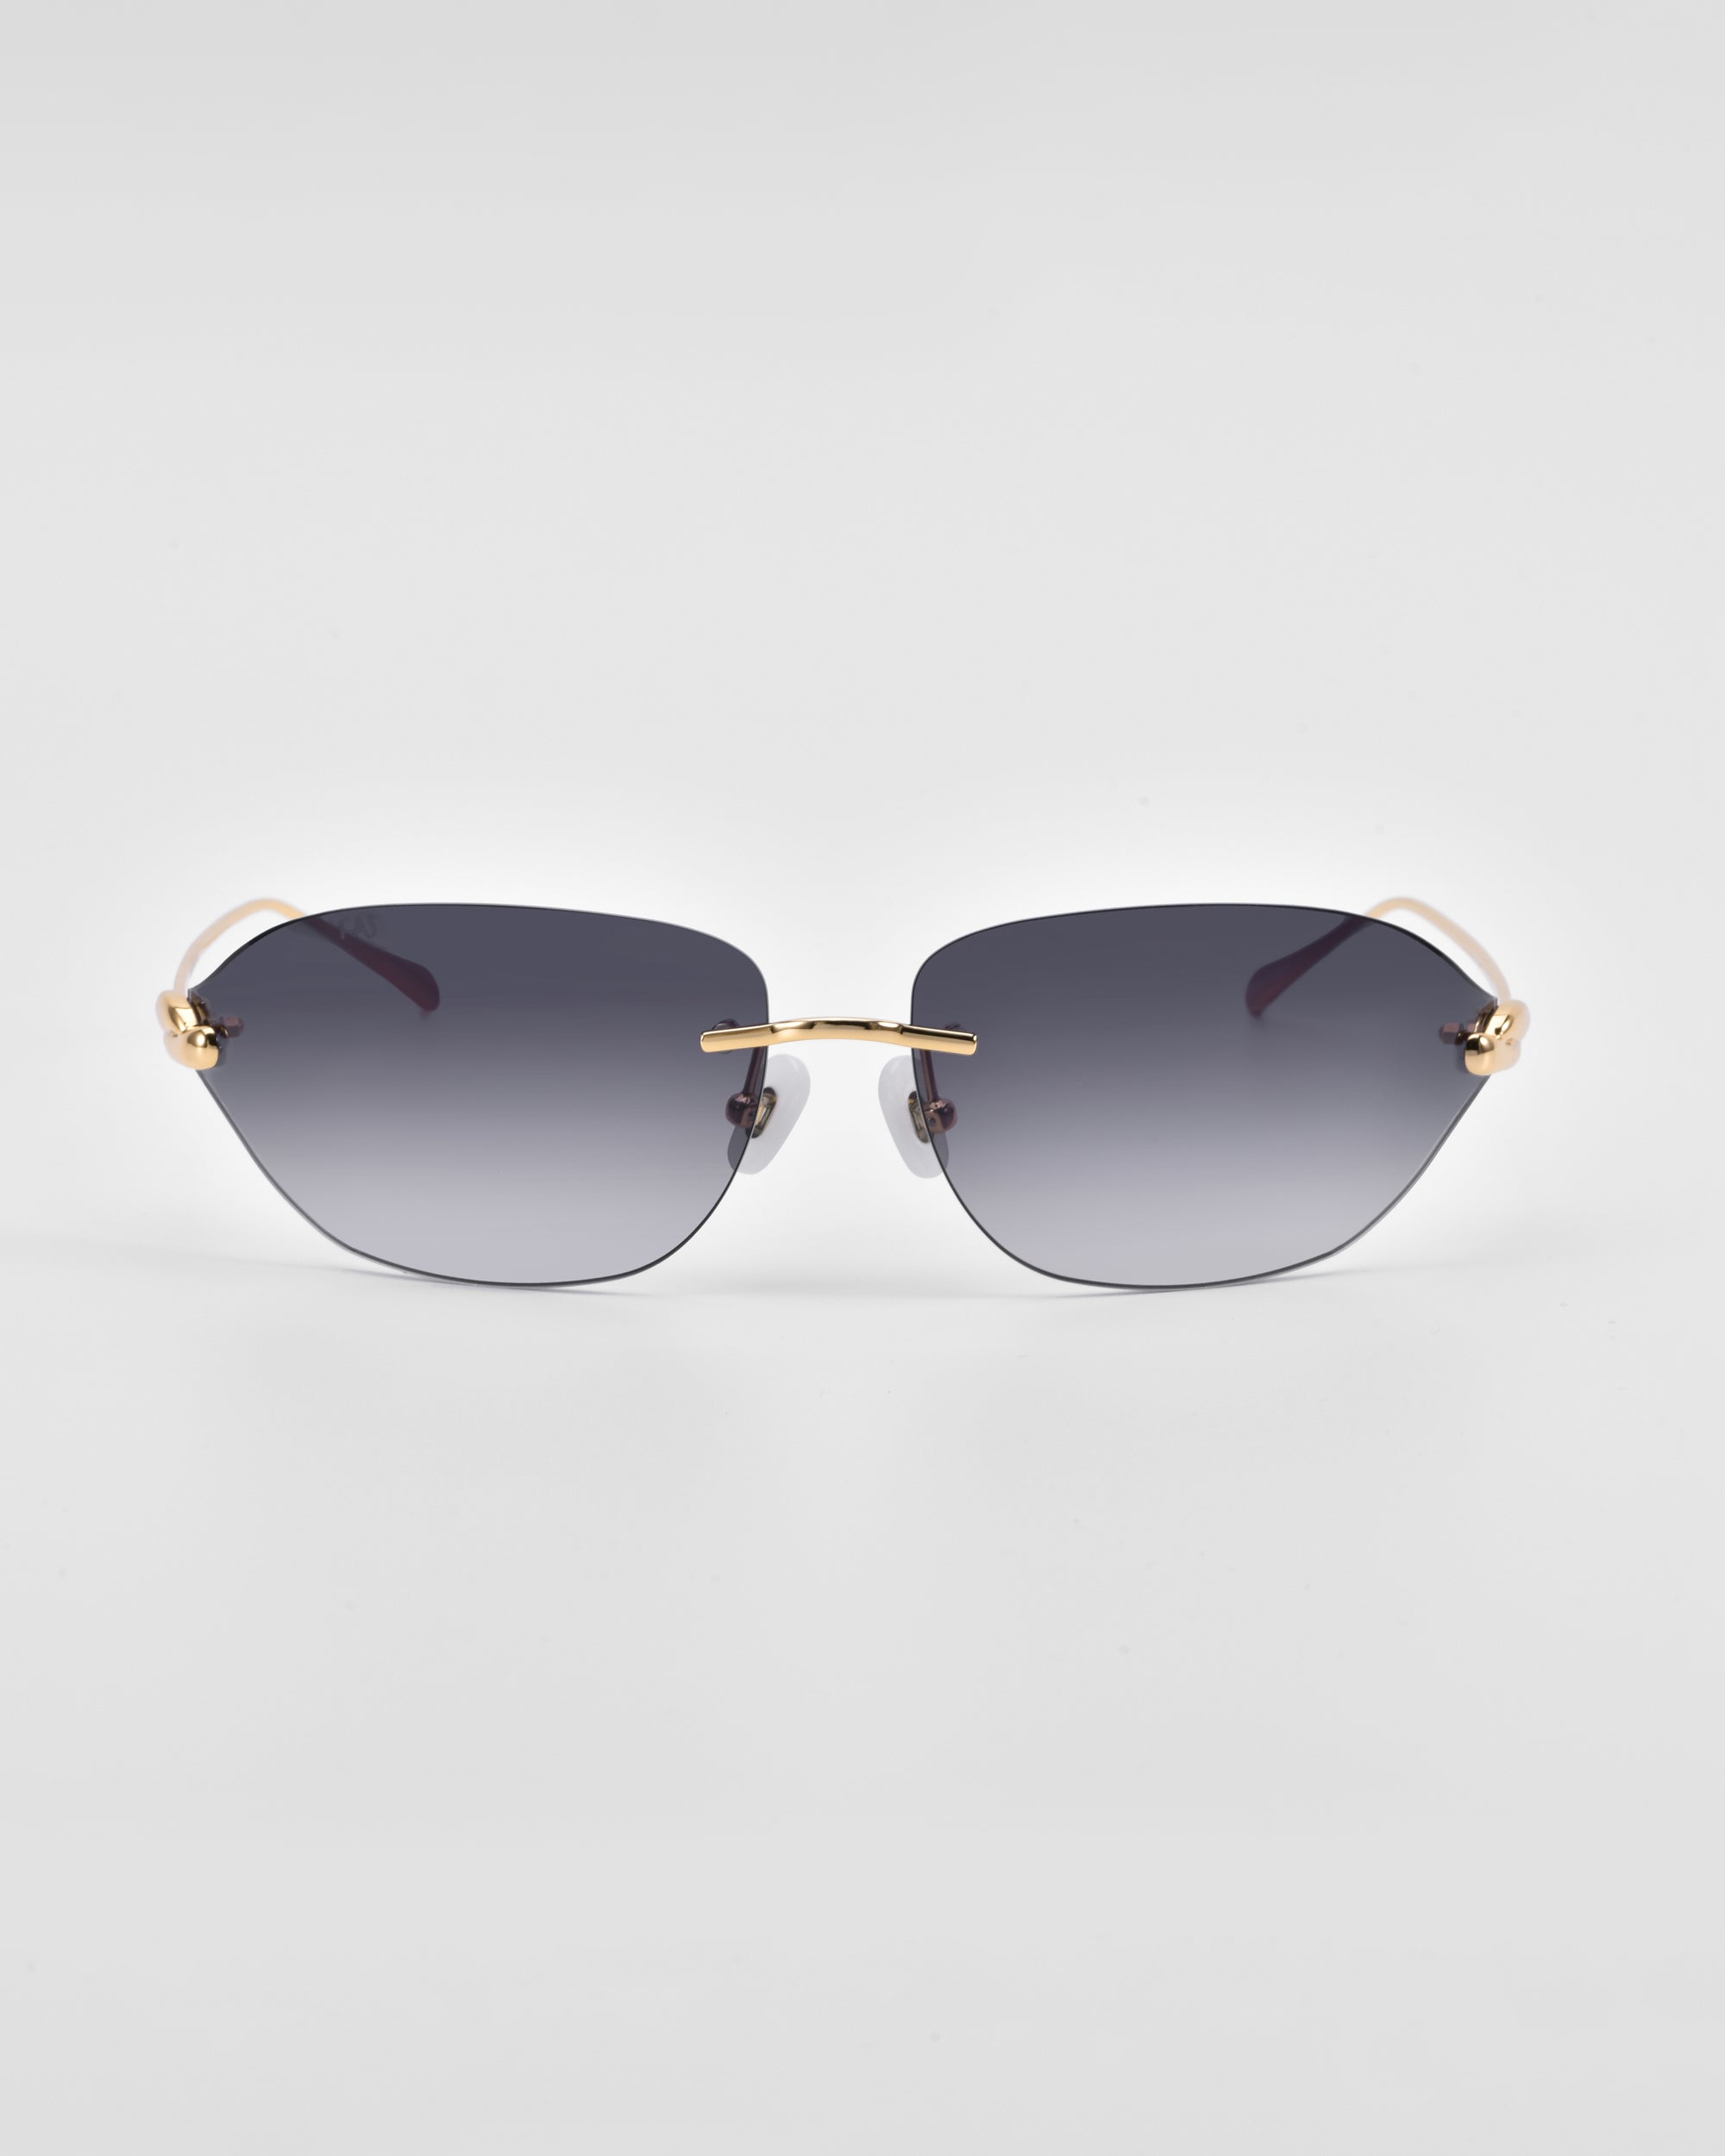 A pair of Serpent I sunglasses with dark gradient lenses and sleek, thin gold frames featuring 18-karat gold plating from For Art's Sake®. The minimalist design includes a bar across the nose bridge, natural jade-stone nose pads, and curved temples. The background is a clean, plain light grey.